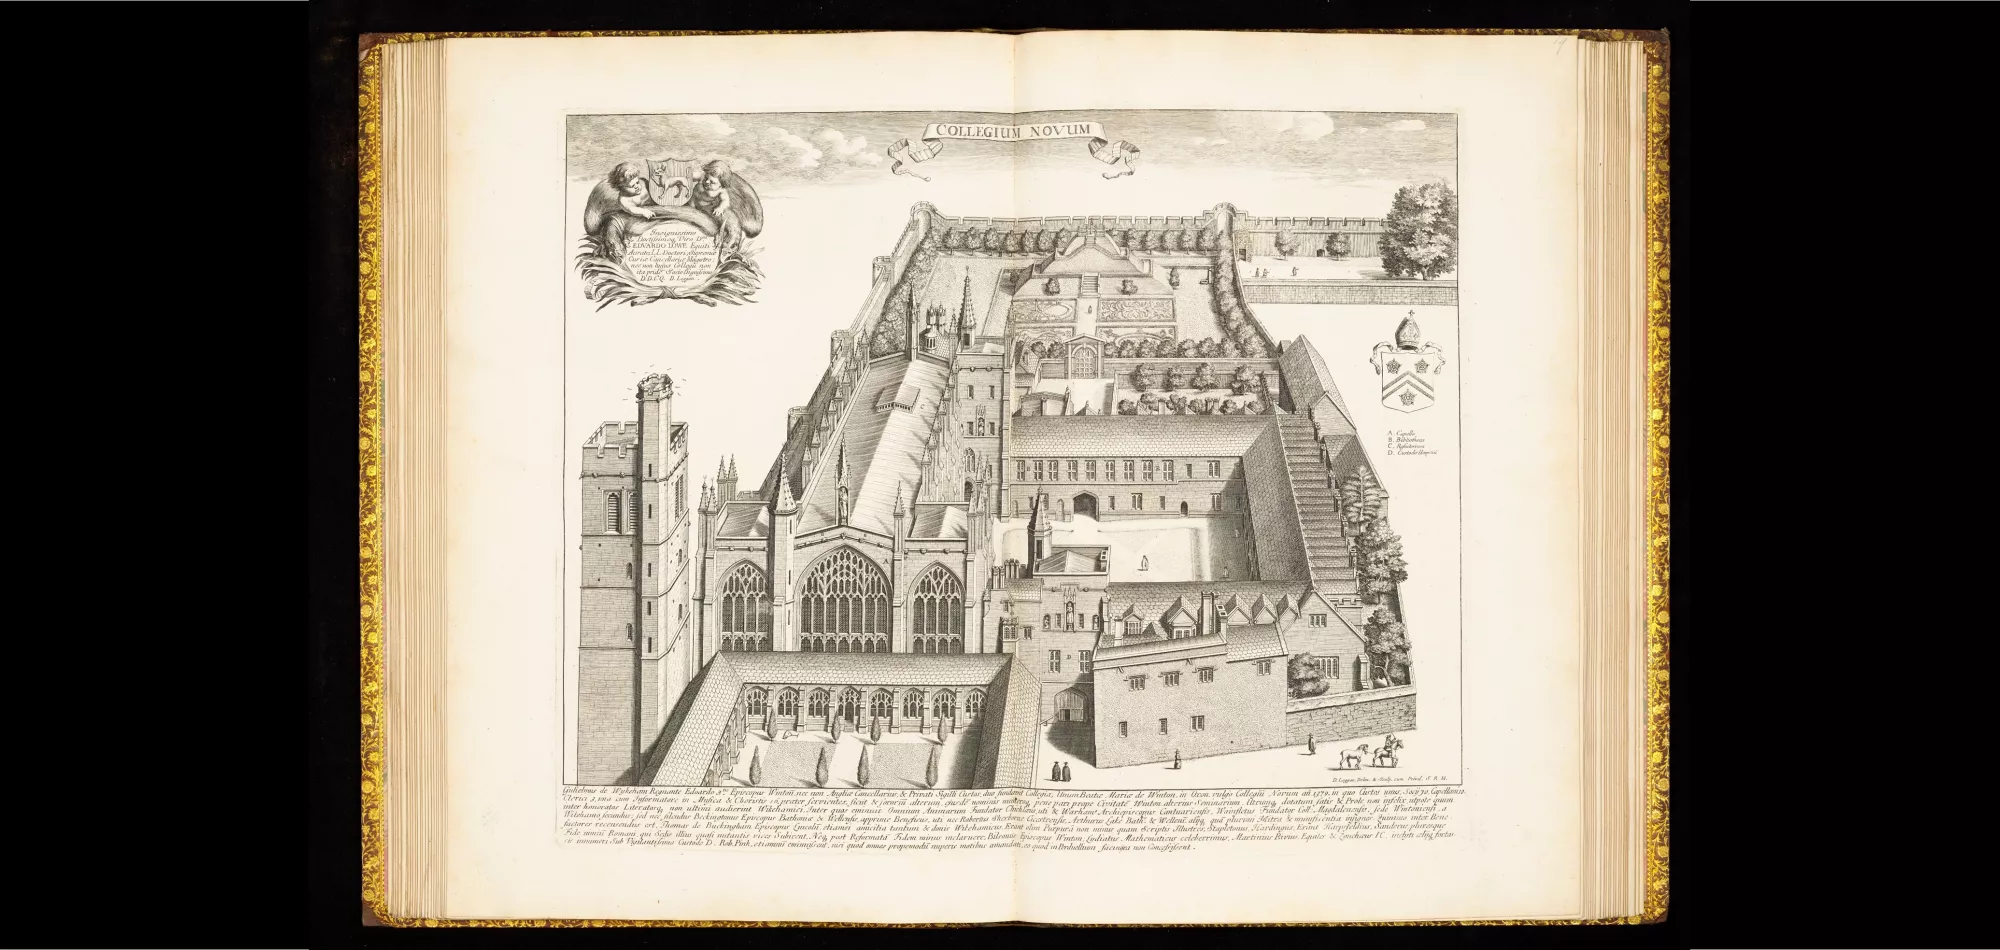 17th century map of New College